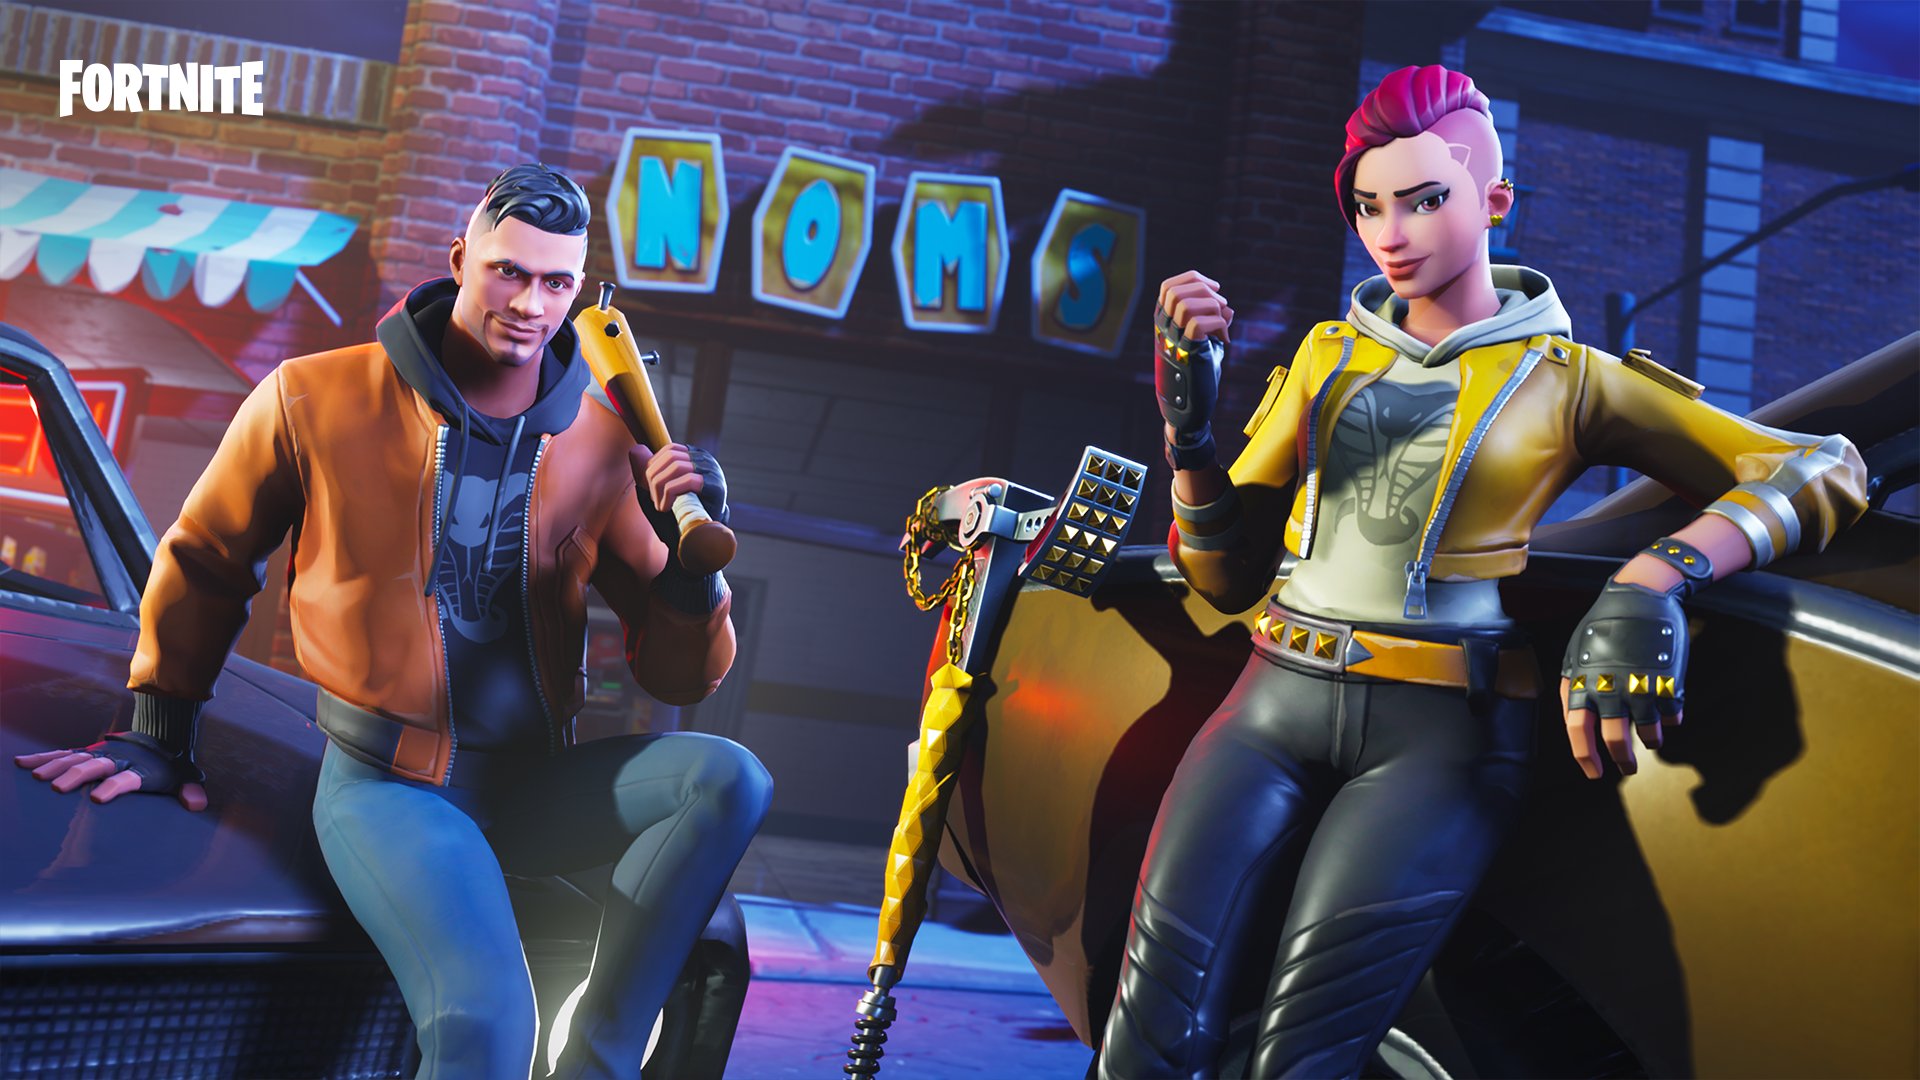 Fortnite arrives on the Google Play Store for Android users - 9to5Google